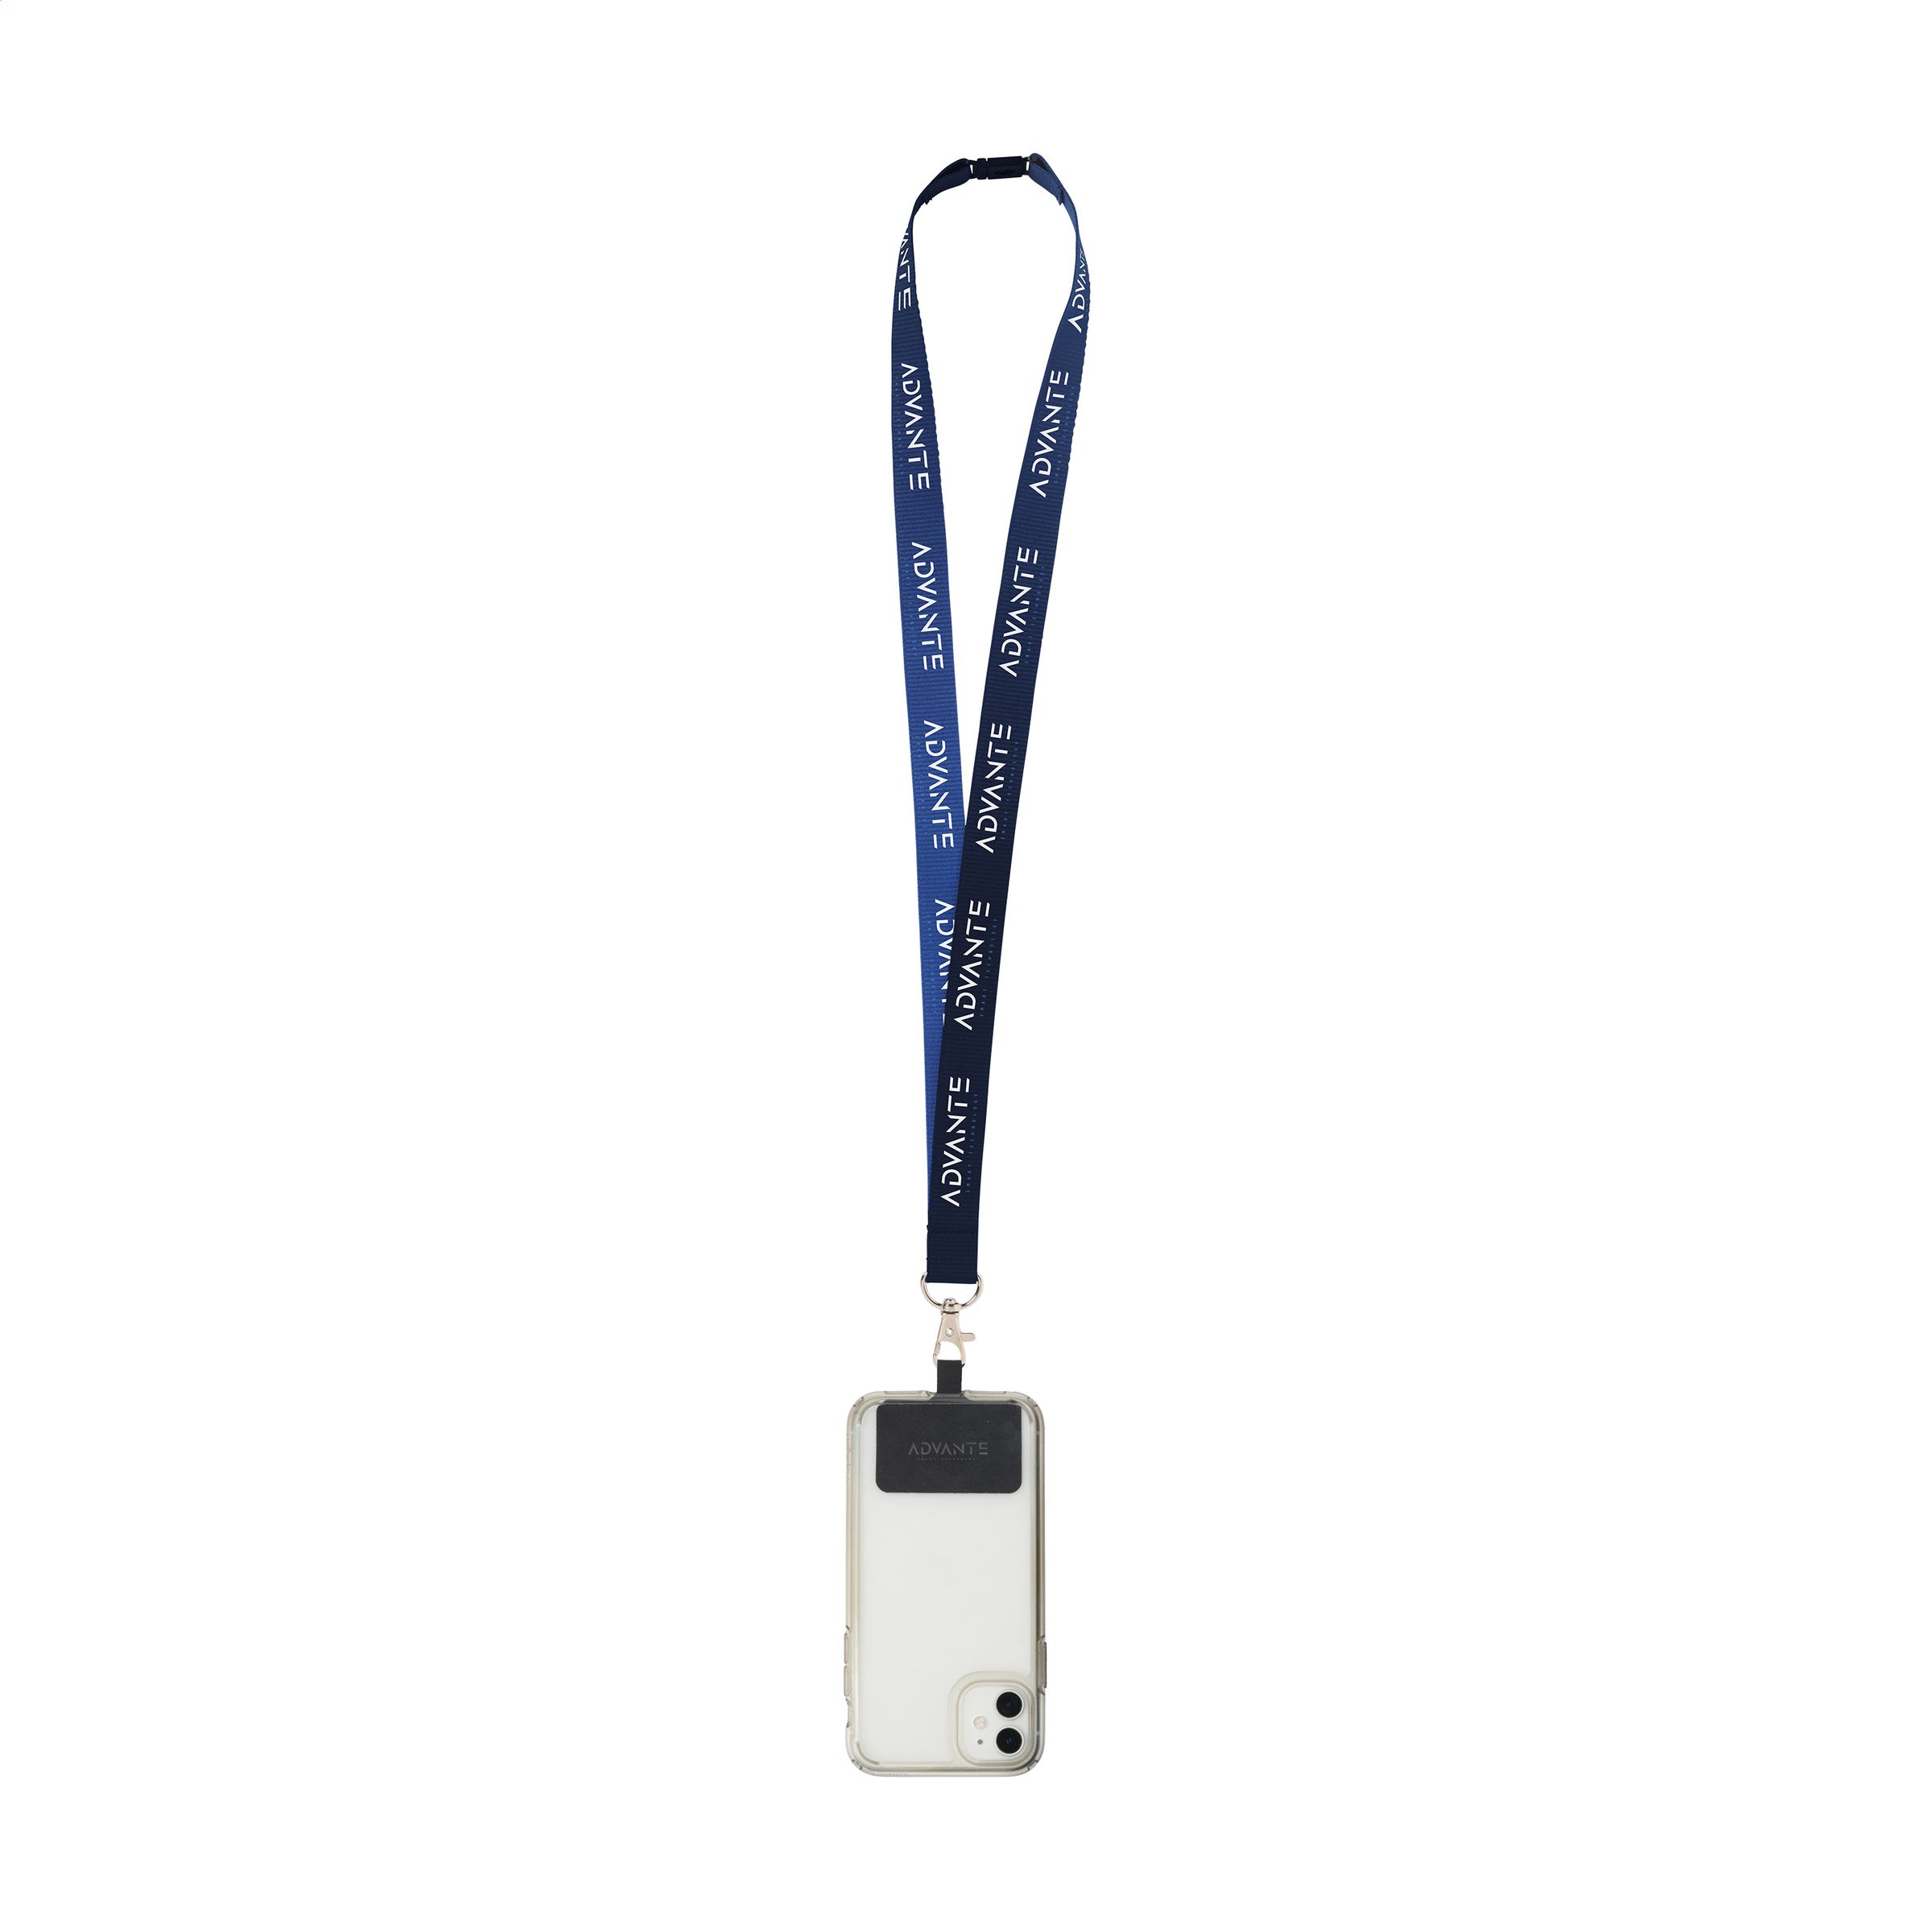 A lanyard made of recycled polyester with a smartphone patch and a carabiner - Harlow